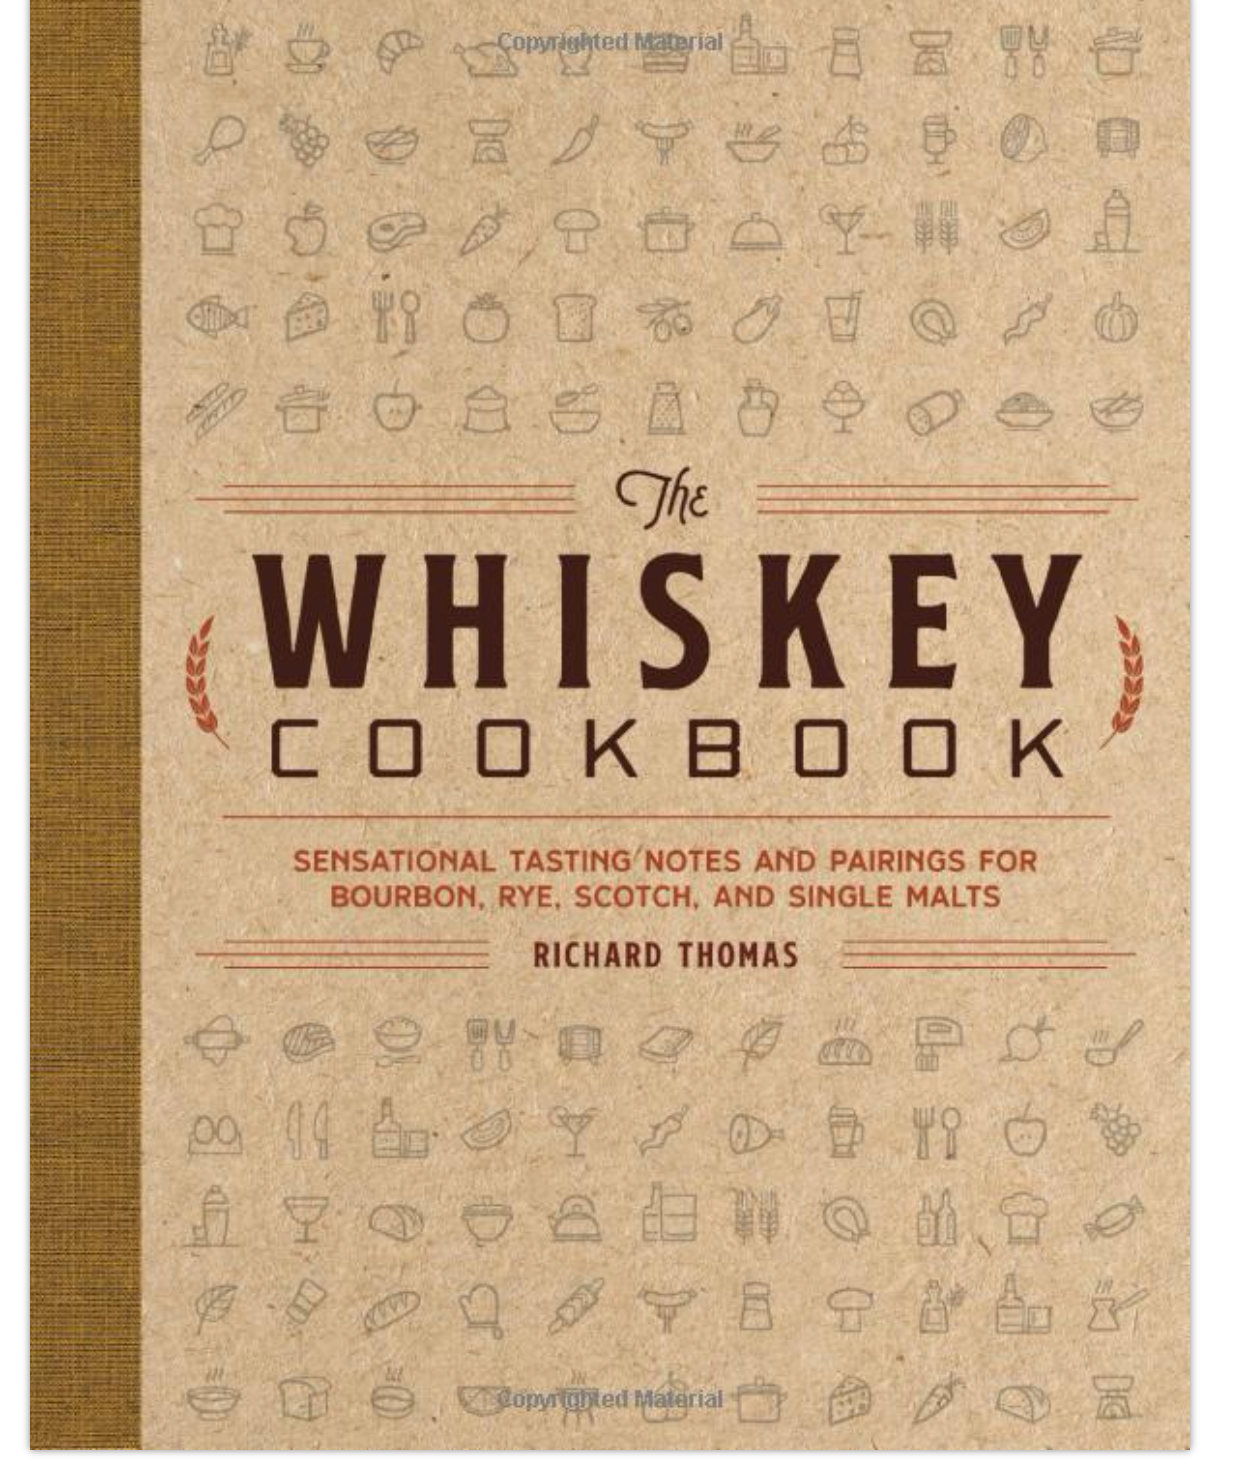 The Whiskey Cookbook